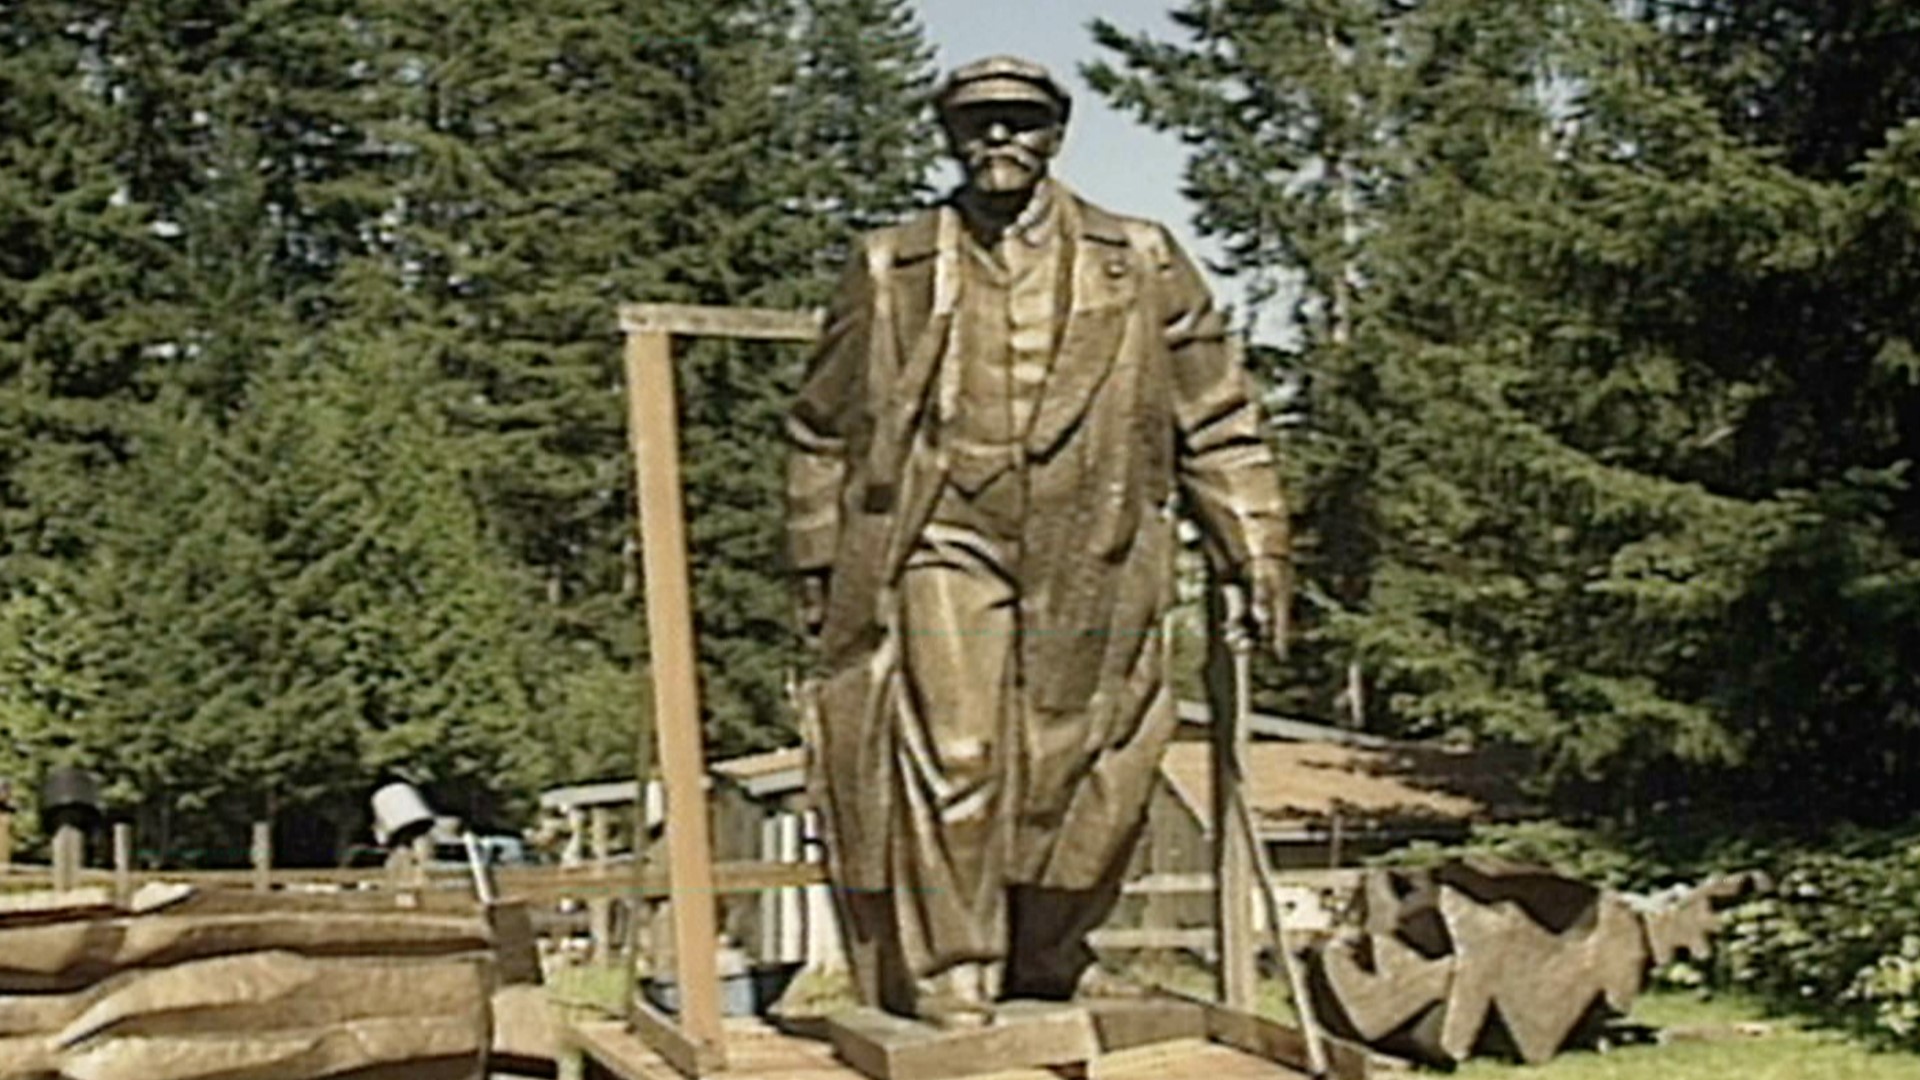 The Lenin sculpture in Seattle's Fremont neighborhood has a colorful past. Revisit its journey in this 1993 story from the KING 5 archives. #king5evening